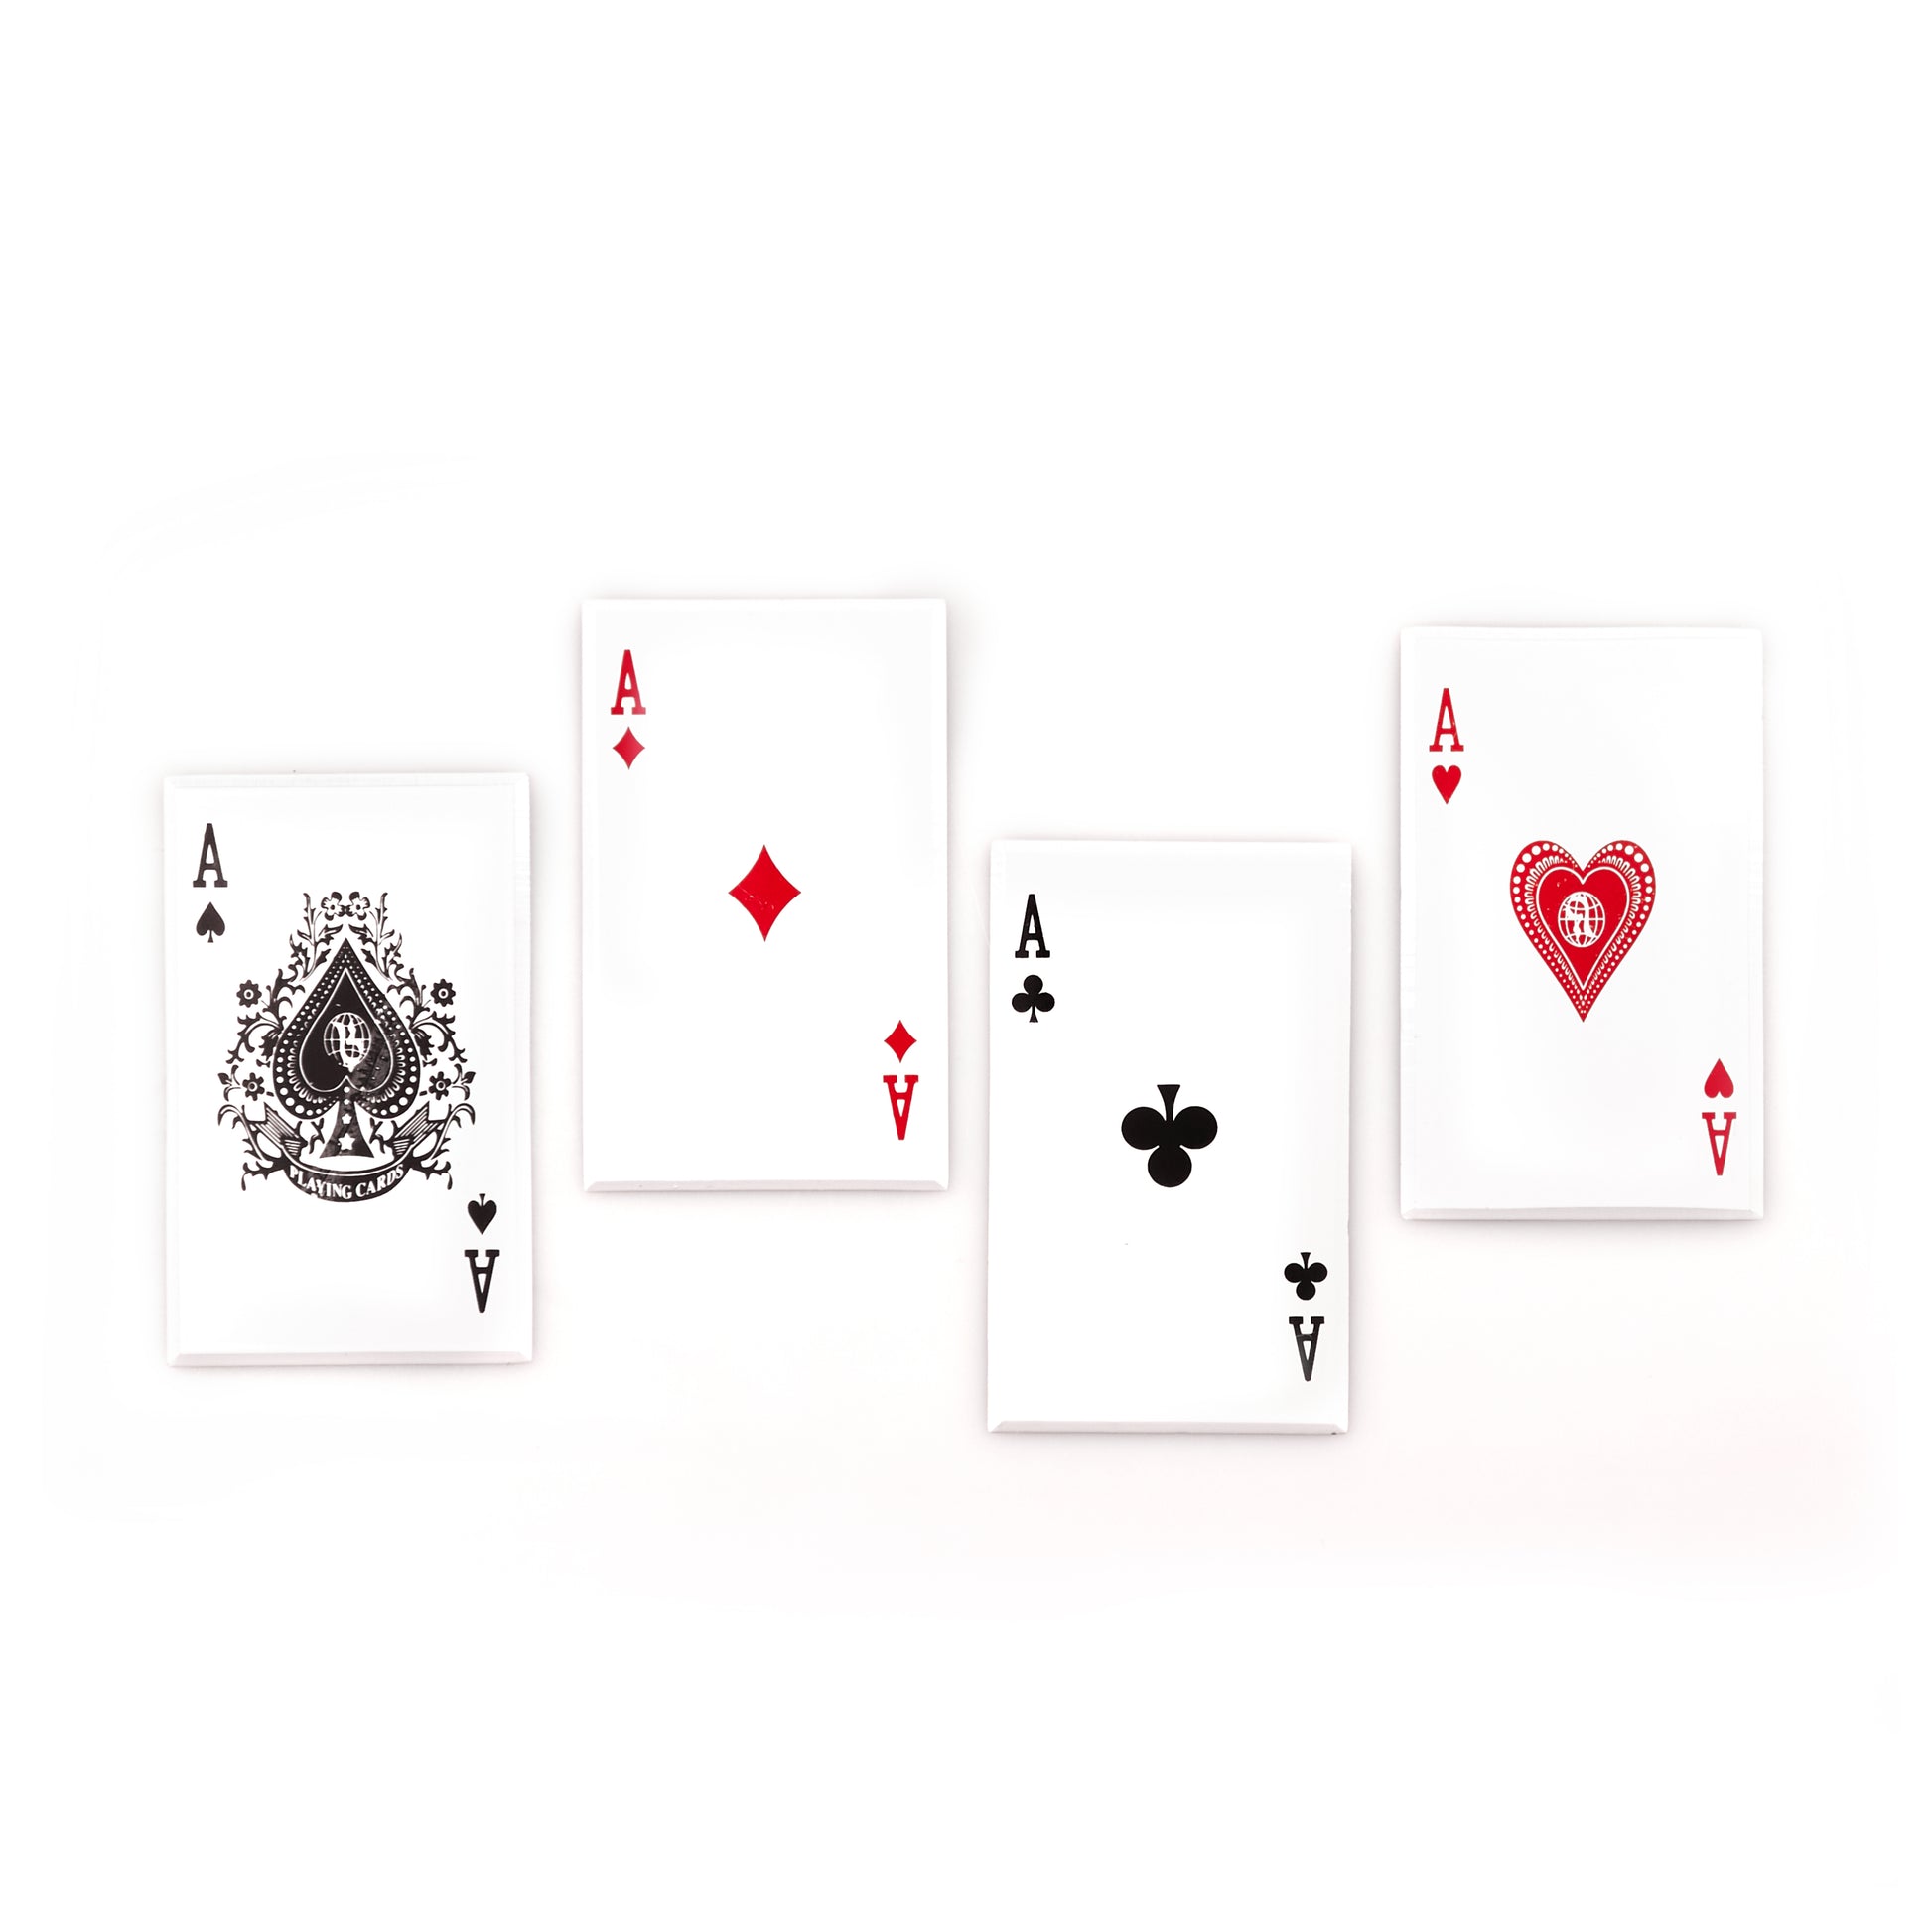 4 Aces Throwing Card Set